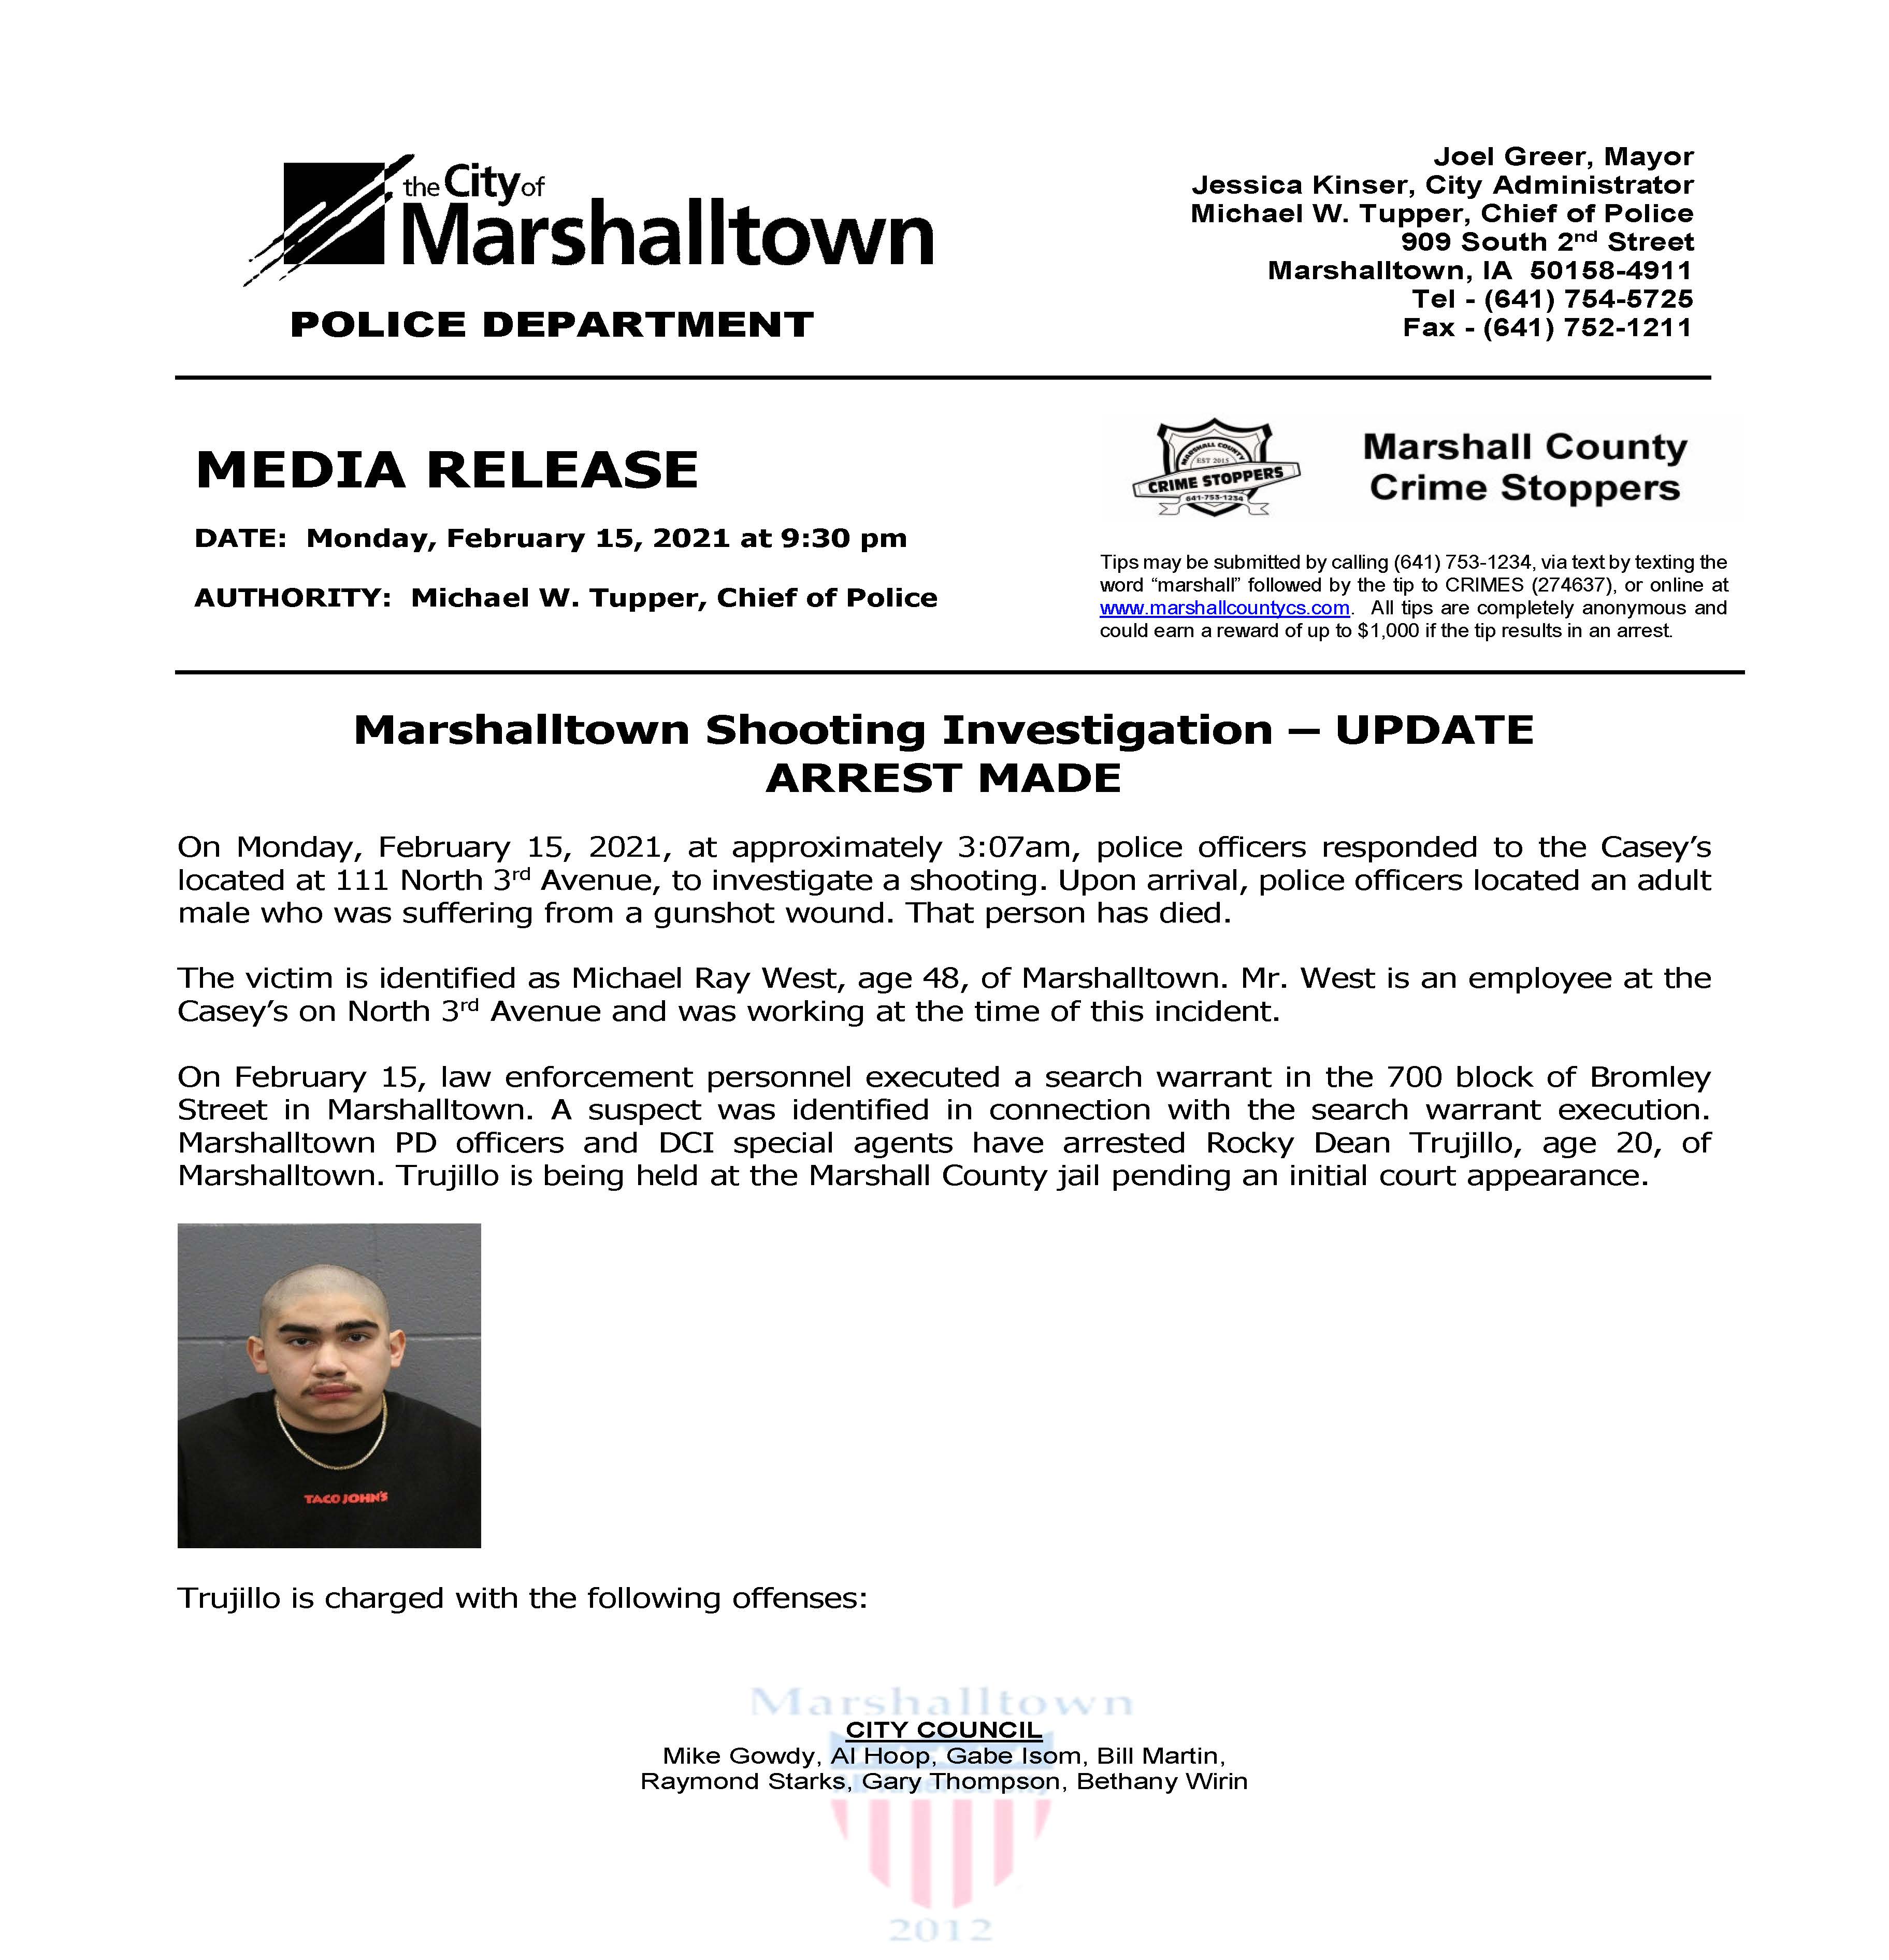 Link to Marshalltown PD press releasae